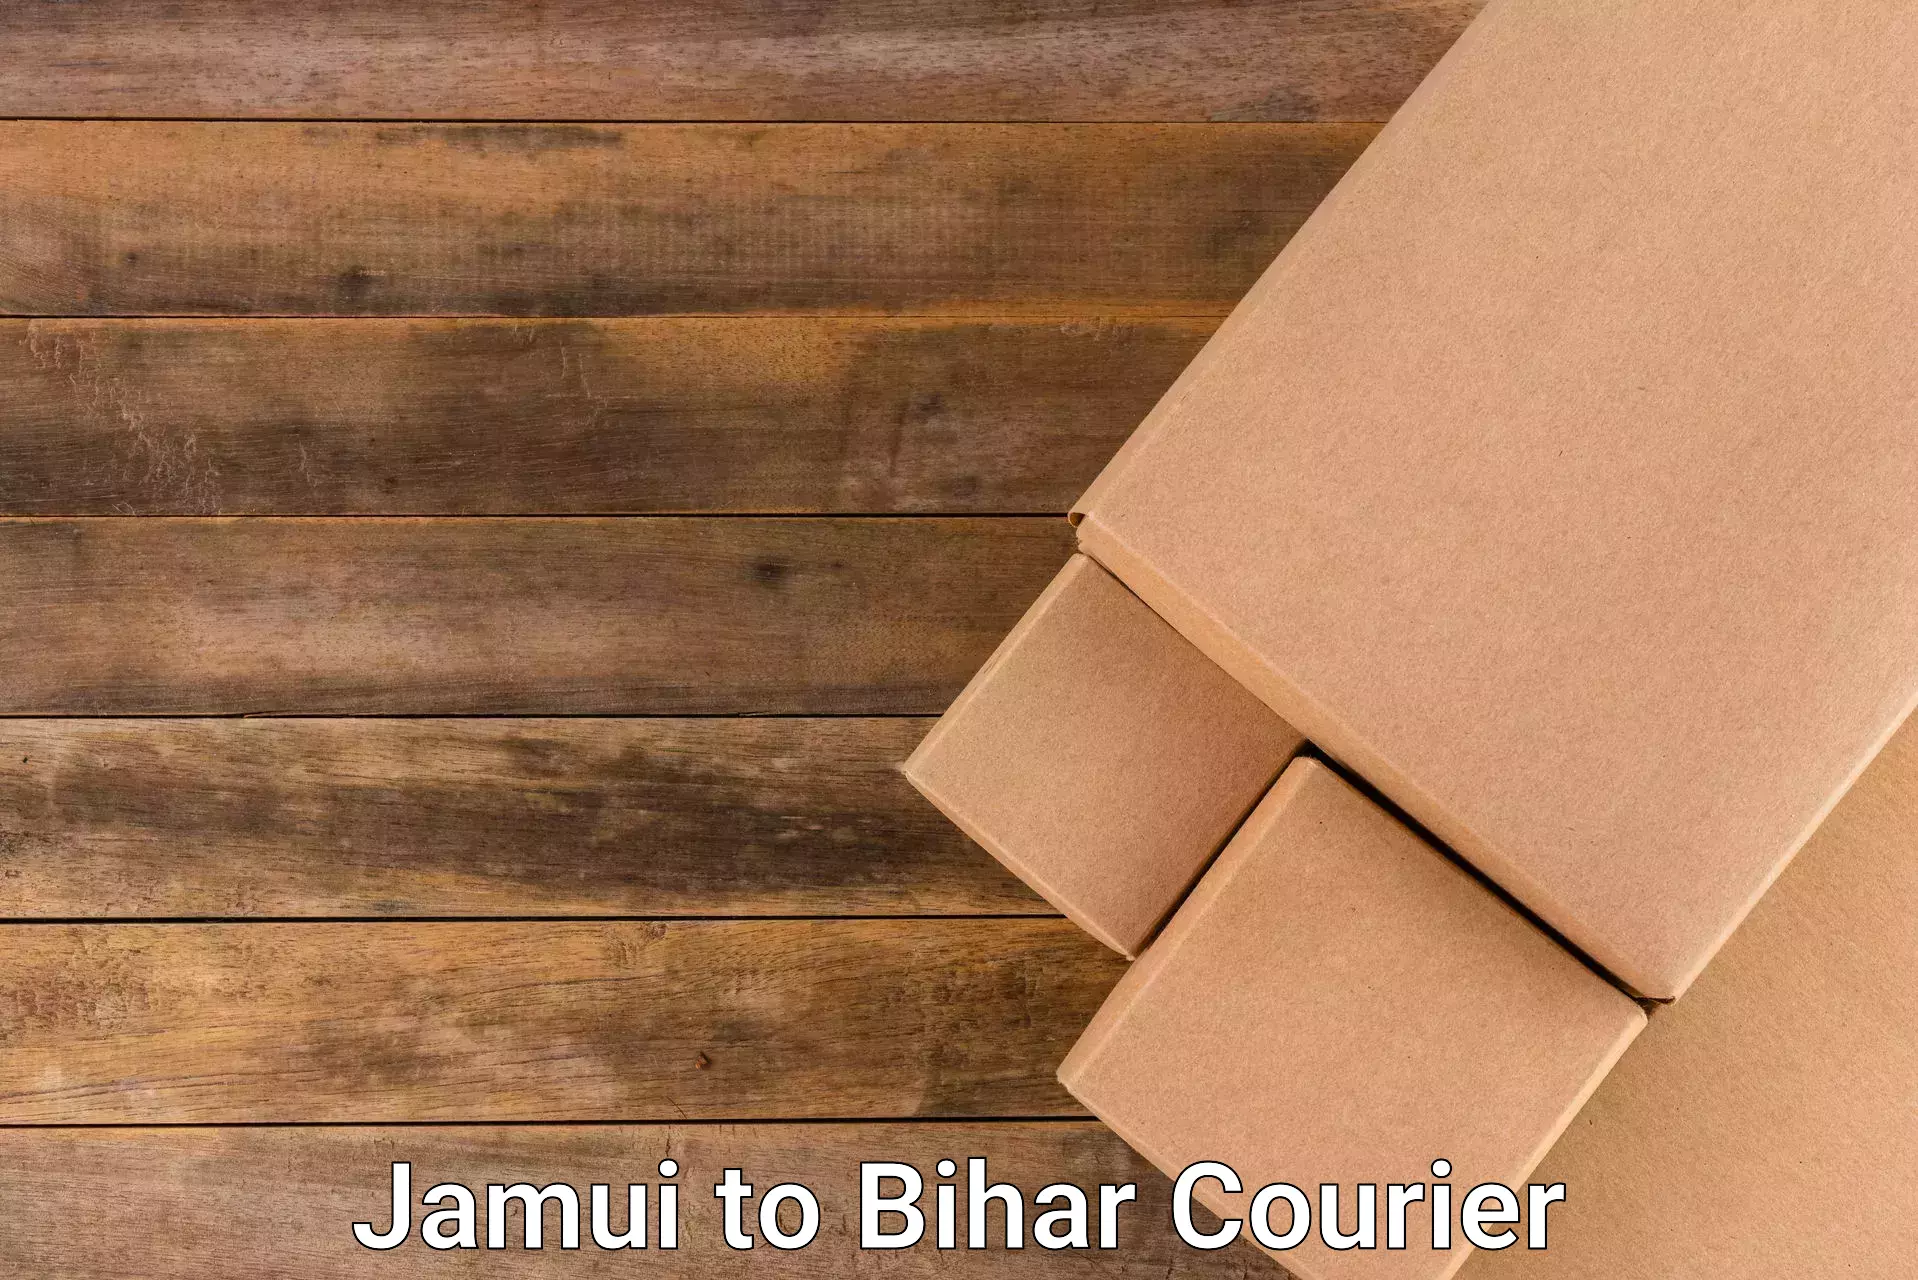 Tailored shipping plans Jamui to Mahnar Bazar